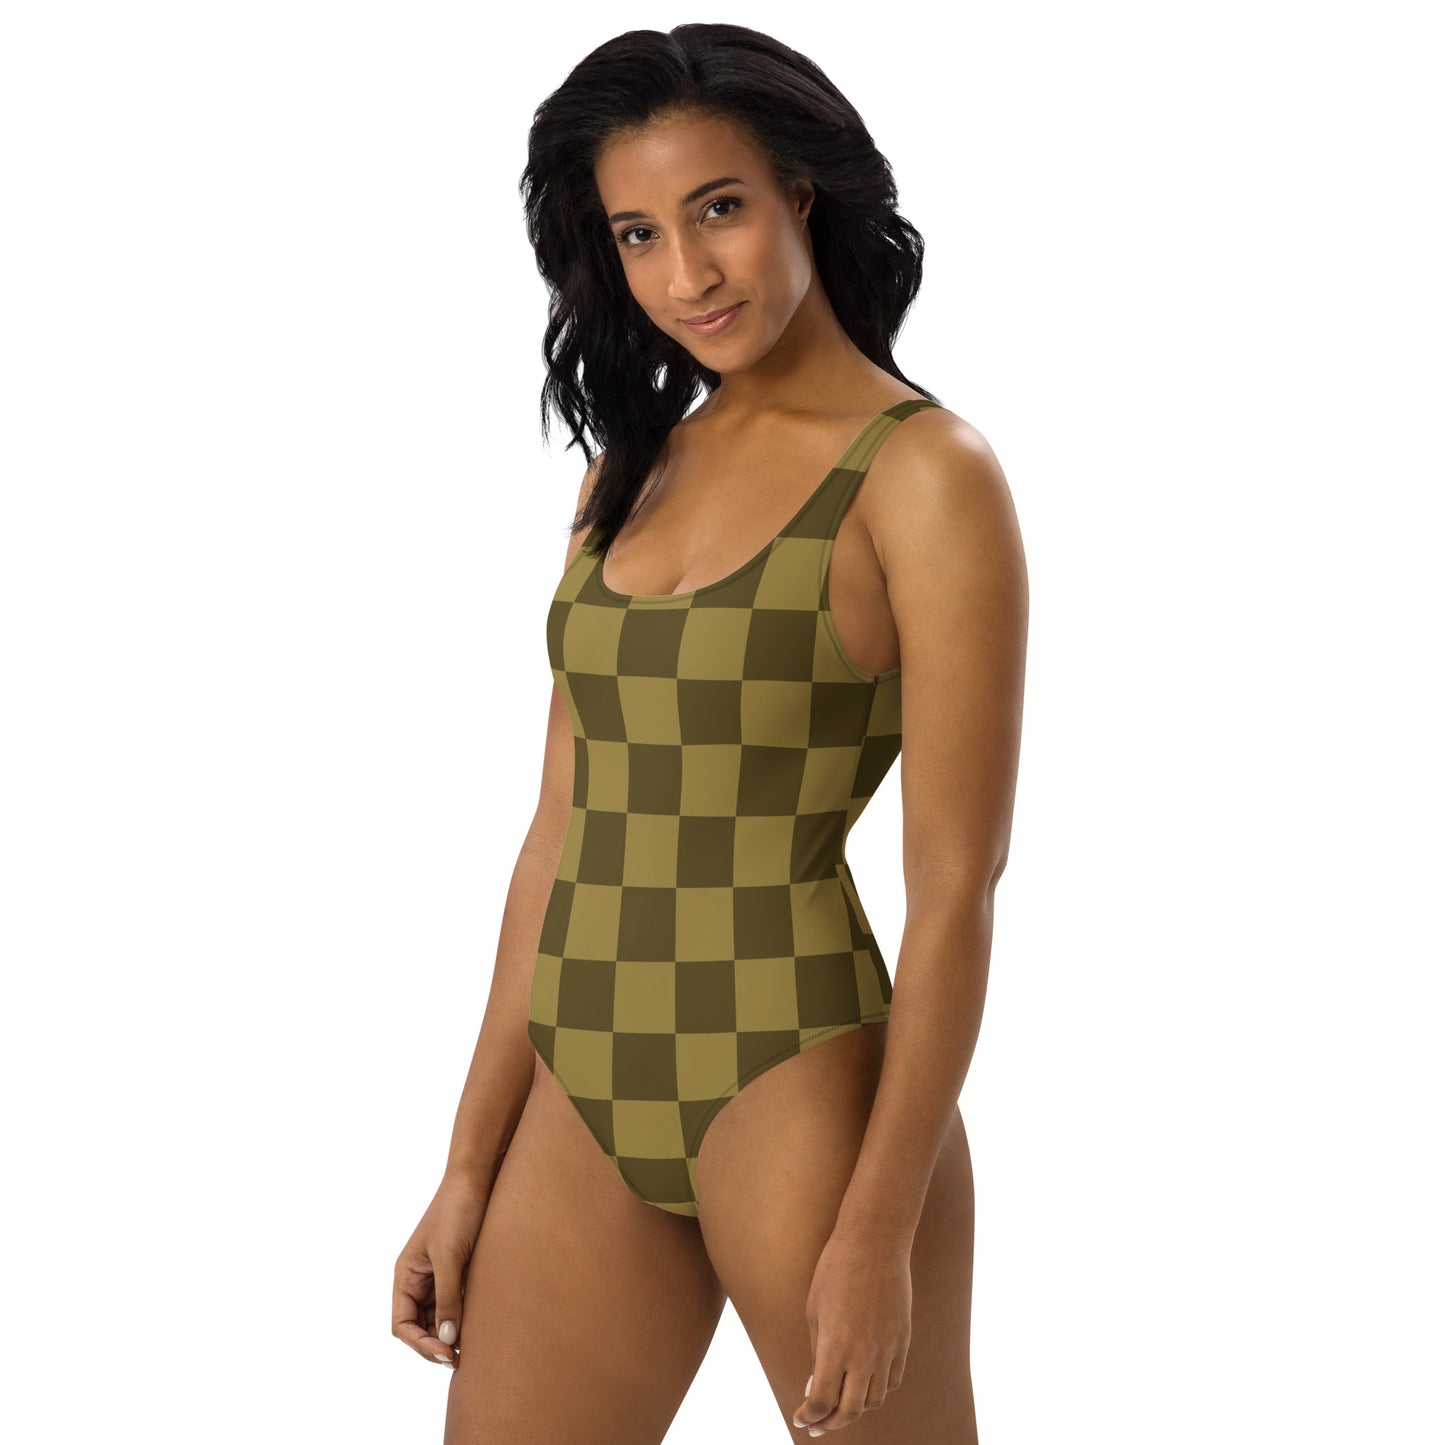 Wempy Dyocta Koto Signature Casual - Sustainably Made One-Piece Swimsuit